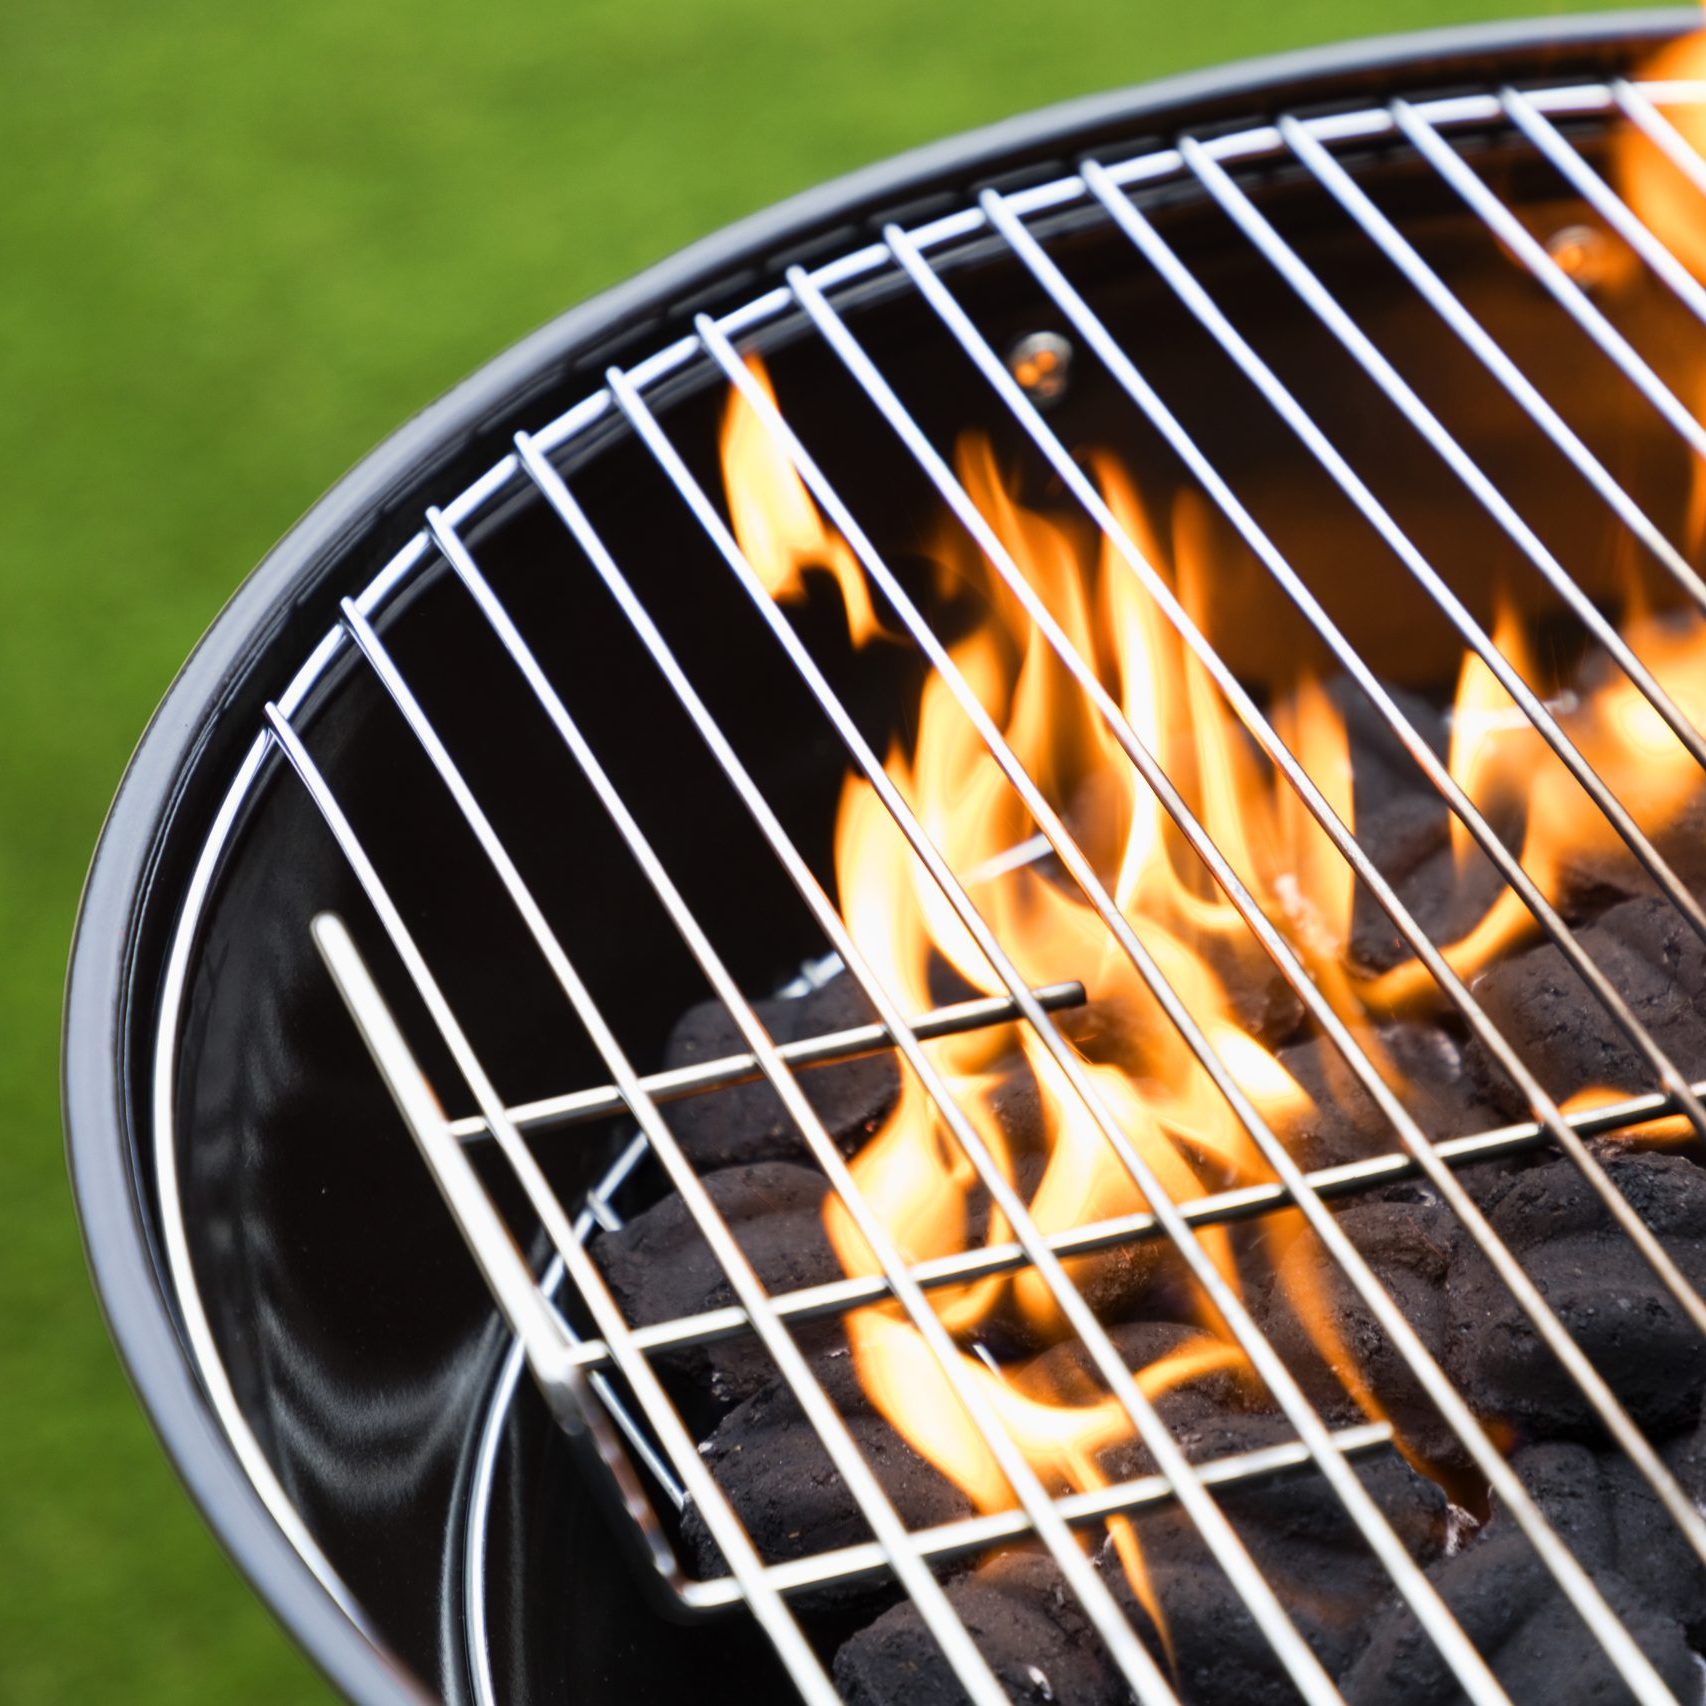 Tips To Clean Your Grill